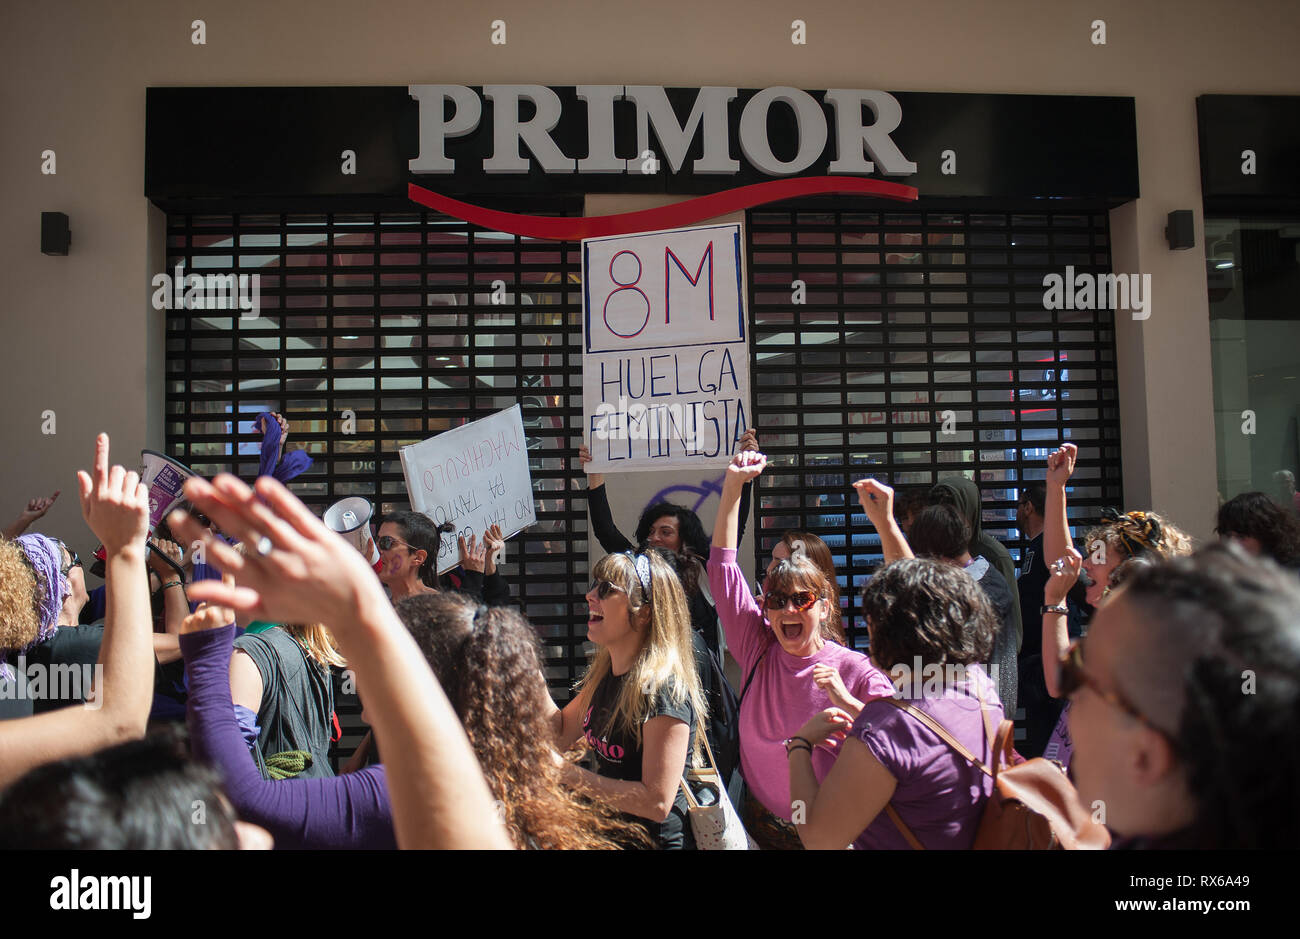 Malaga, MALAGA, Spain. 8th Mar, 2019. A group of picketers women are seen chanting slogans outside primor shop during the 24-hours General Women's Strike.A 24-hour General Women's Strike. Every 08 march coinciding with the International Women's Day, thousands of women and organizations around the world take the streets to protest against women violence and to demand for gender equality between men and women. Credit: Jesus Merida/SOPA Images/ZUMA Wire/Alamy Live News Stock Photo